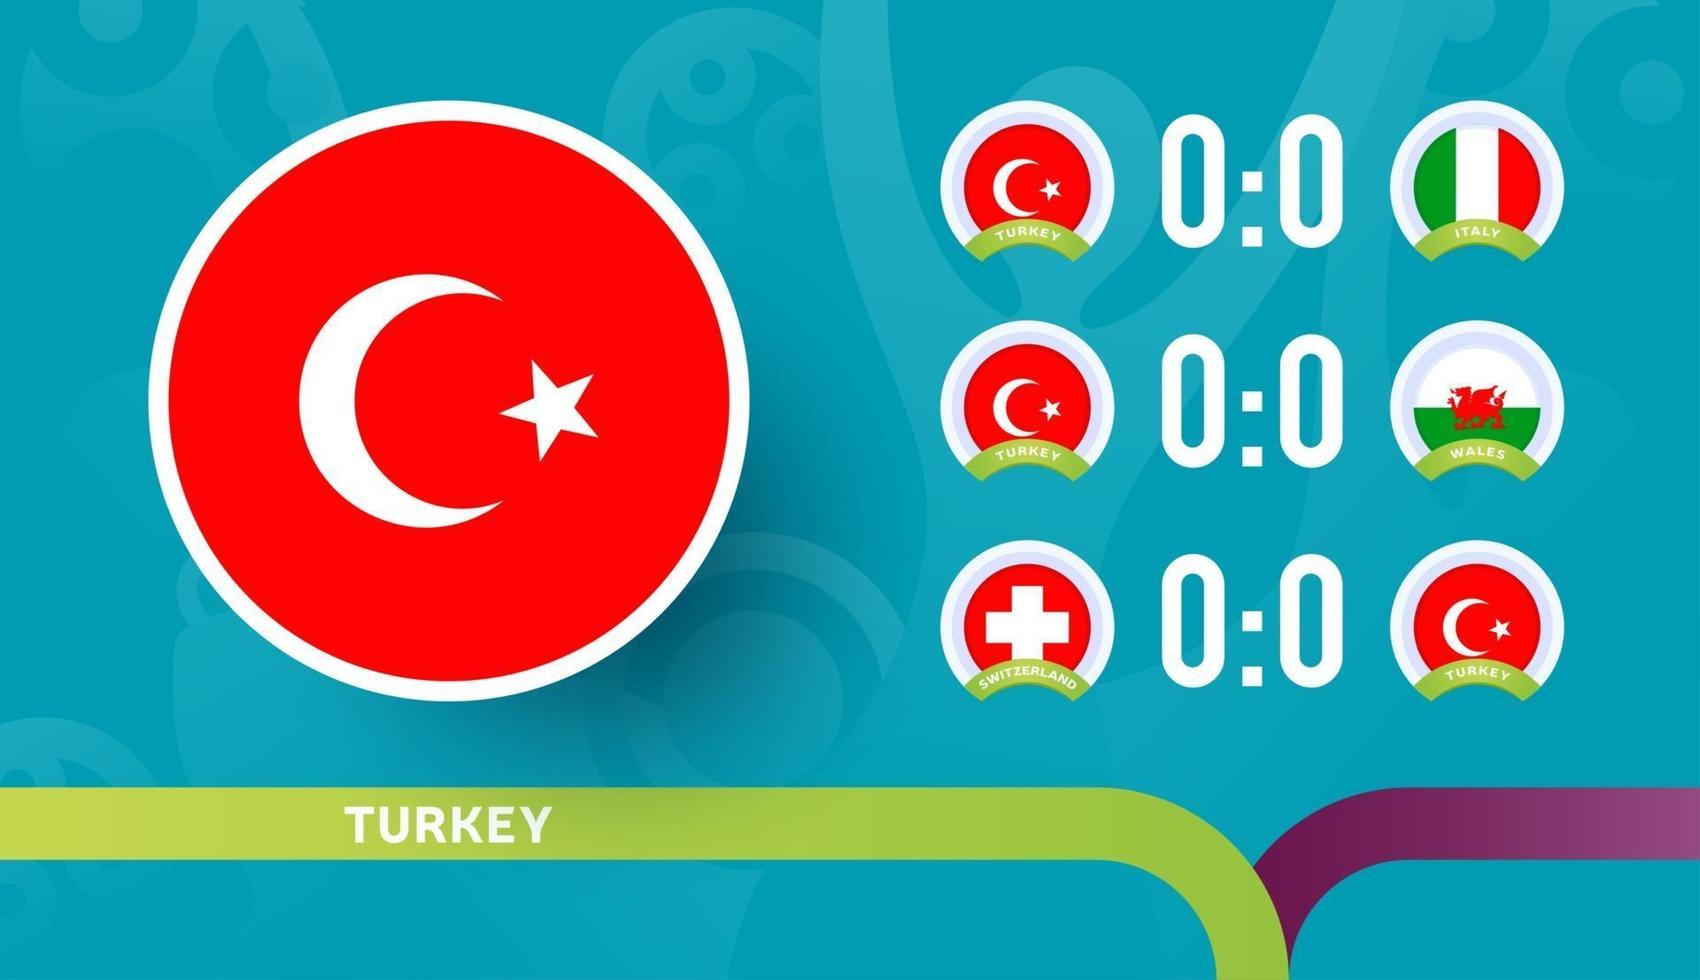 turkey national team Schedule matches in the final stage at the 2020 Football Championship. Vector illustration of football 2020 matches.